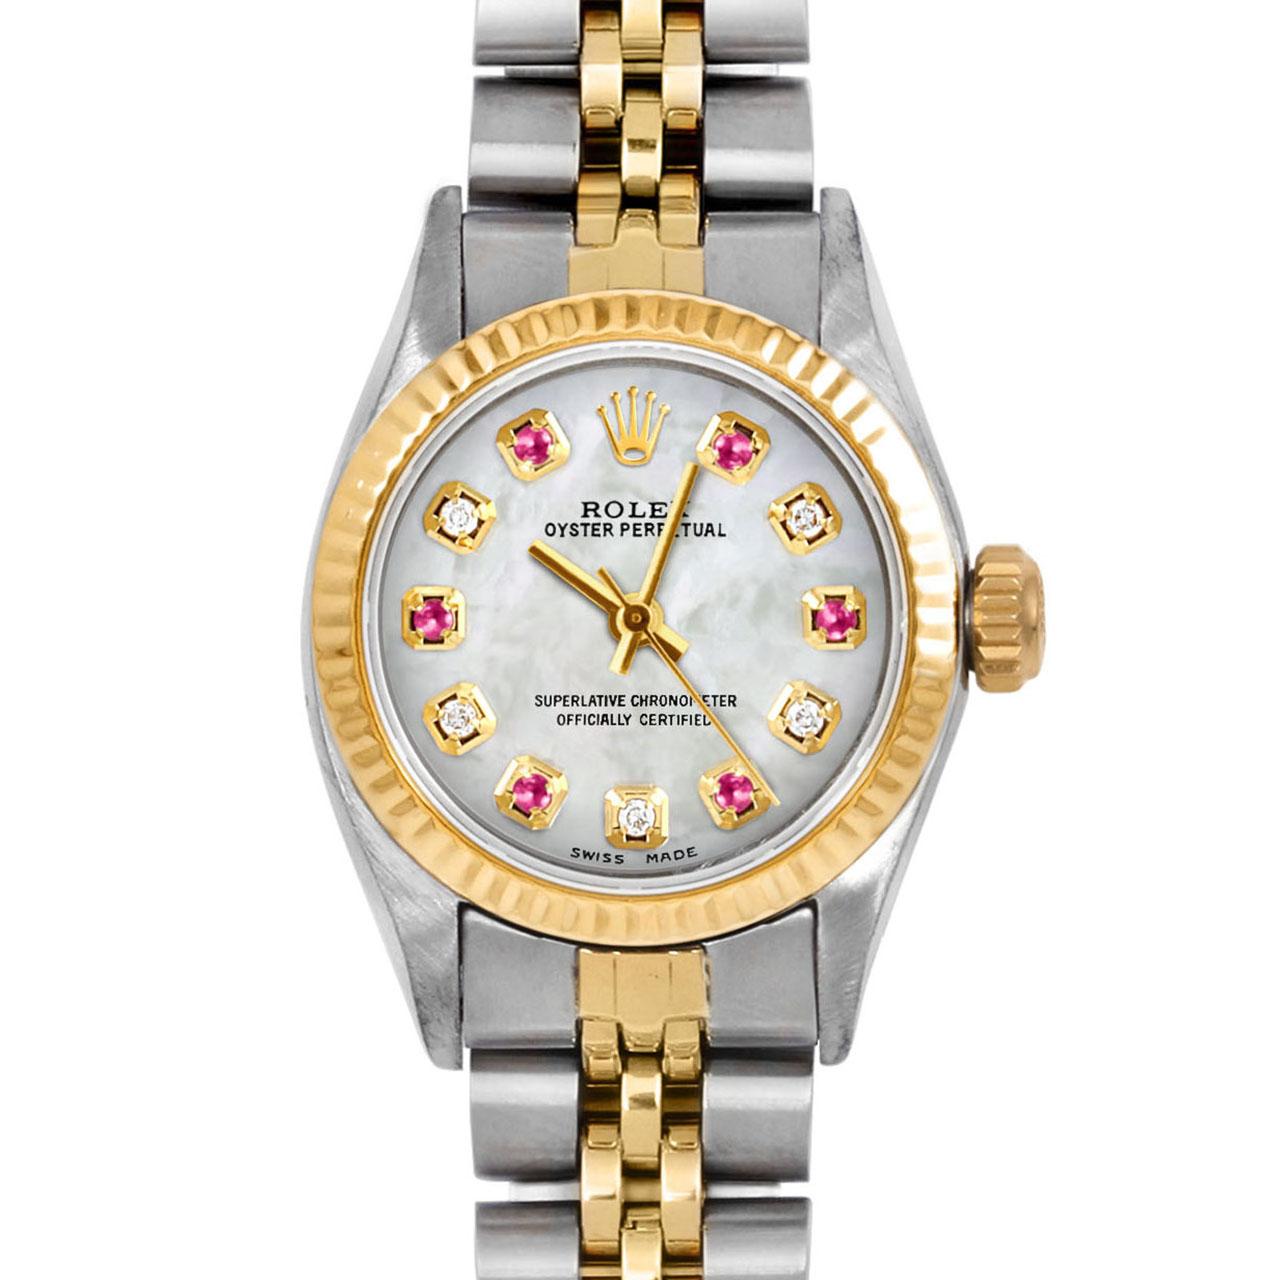 Brand : Rolex
Model : Oyster Perpetual 
Gender : Ladies
Metals : 14K Yellow Gold / Stainless Steel
Case Size : 24 mm
Dial : Custom Mother Of Pearl Ruby Diamond Dial (This dial is not original Rolex And has been added aftermarket yet is a beautiful